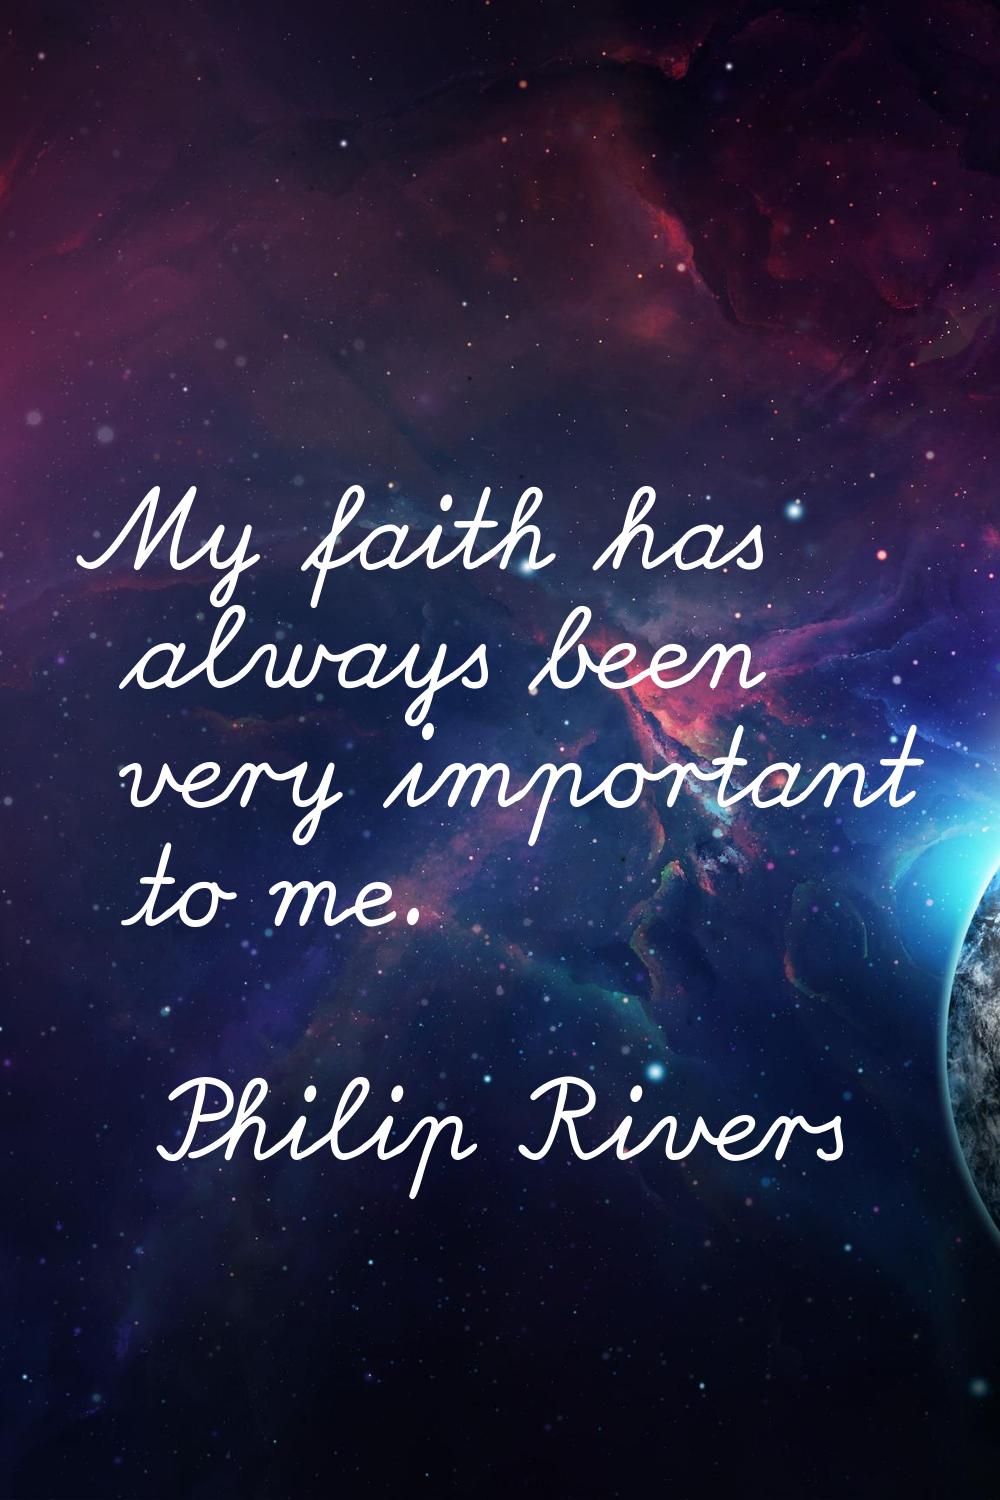 My faith has always been very important to me.